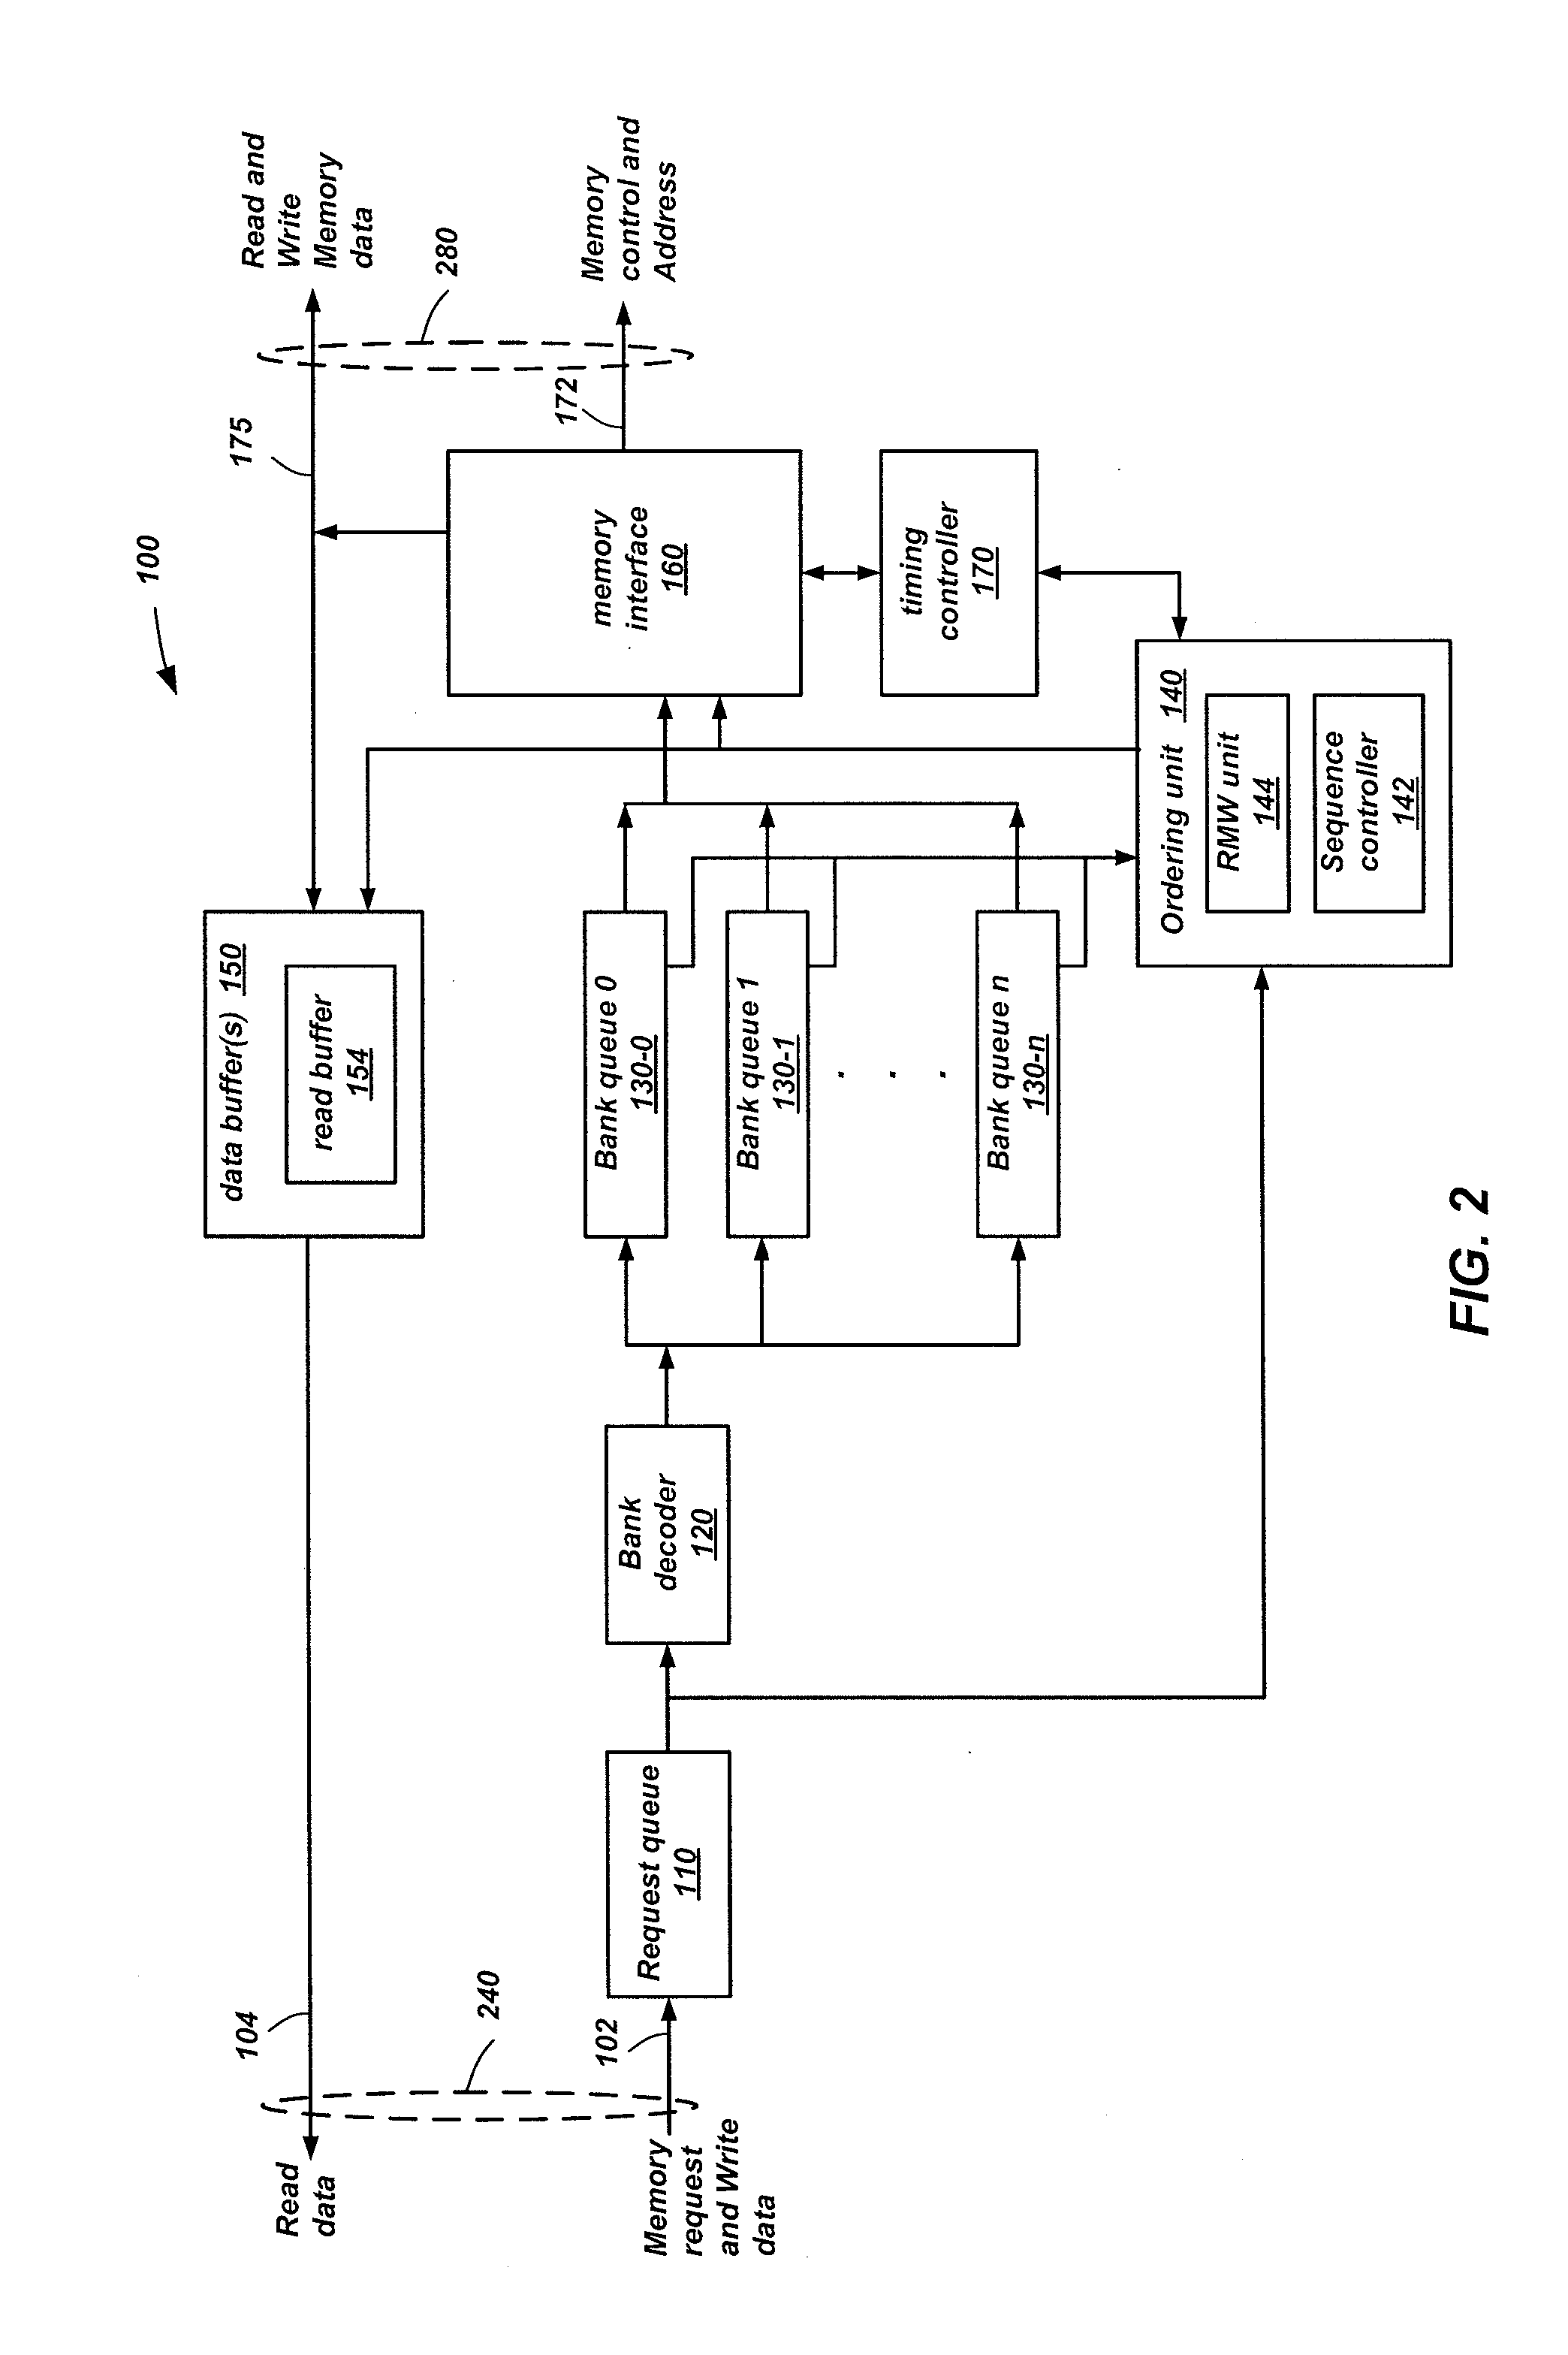 System, apparatus, and method for modifying the order of memory accesses